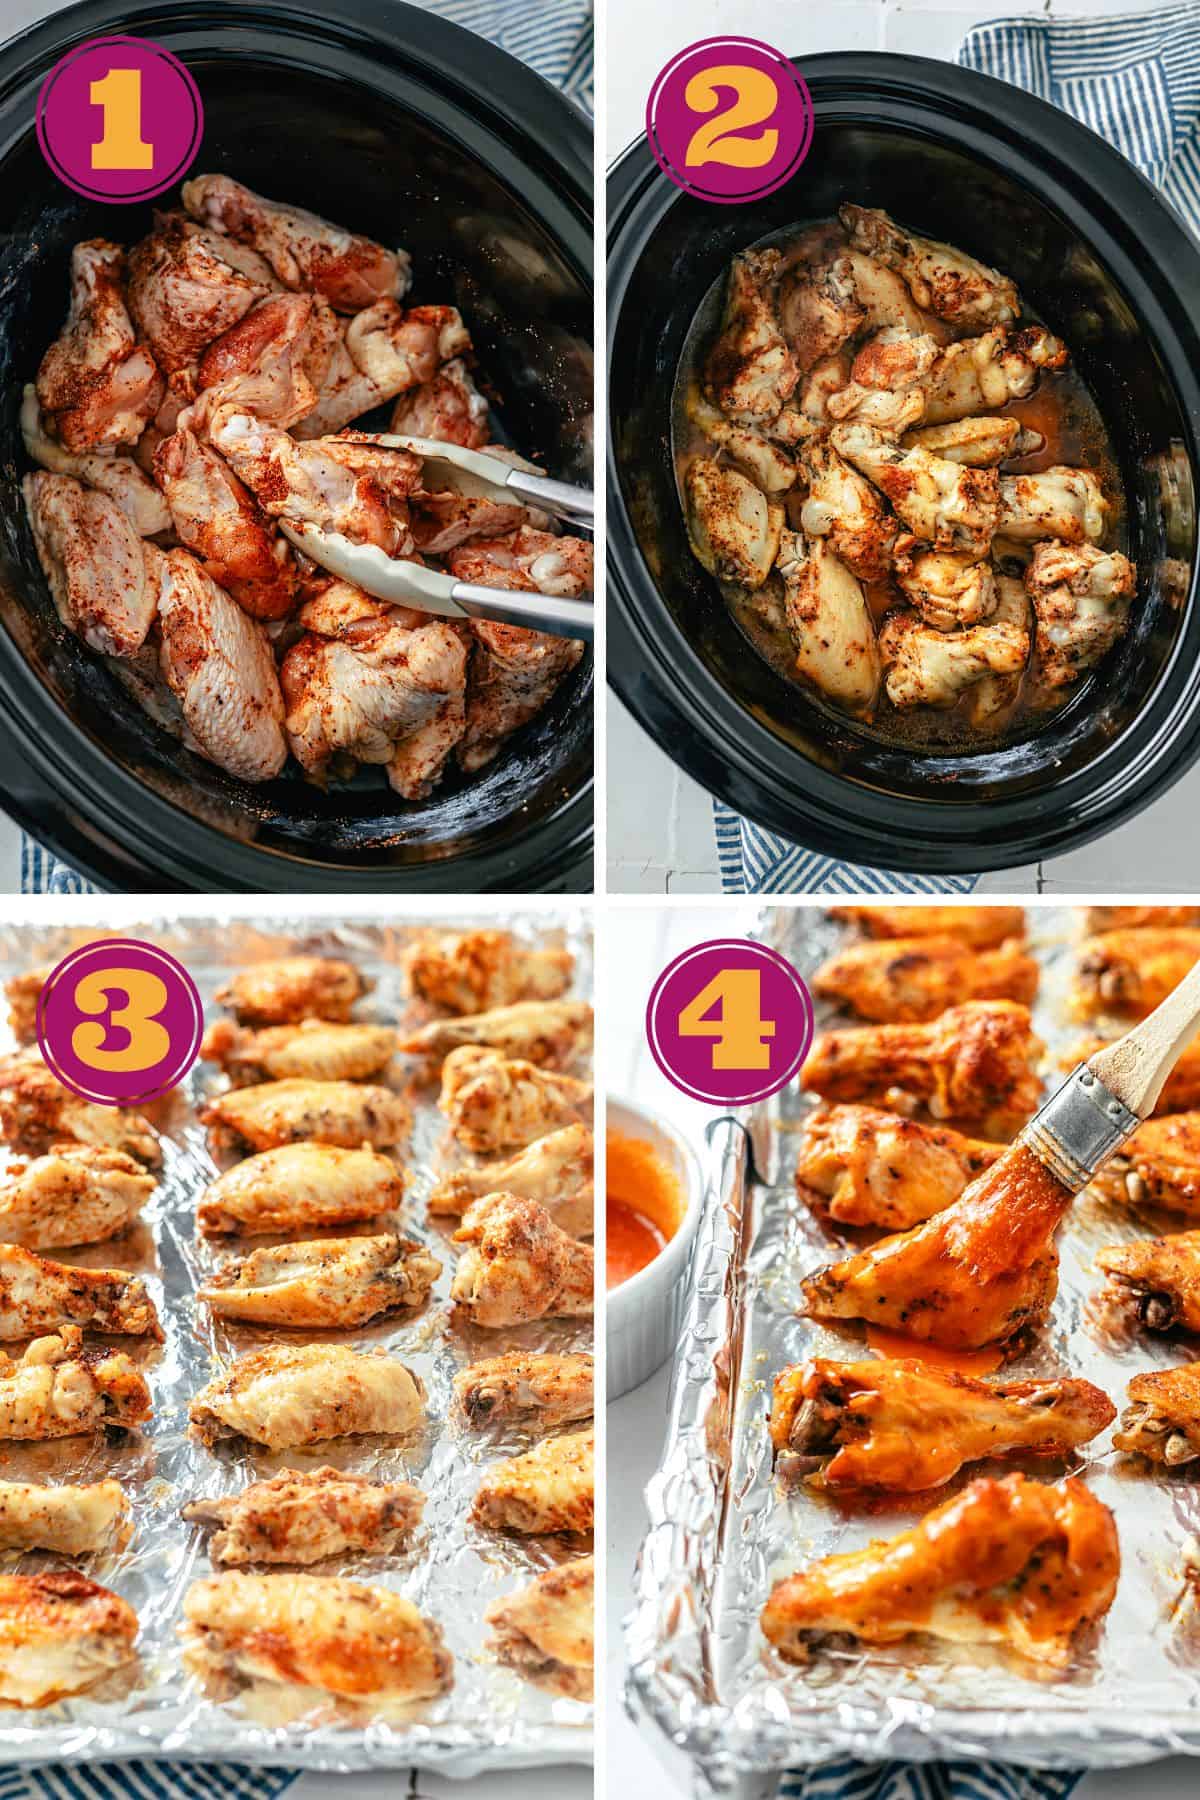 A step-by-step image guide illustrating the process of crafting zesty Crockpot Buffalo Wings in four easy-to-follow steps - adding the meat and seasoning to the slow cooker and adding the wings to a sheet pan with a wire rack to broil.